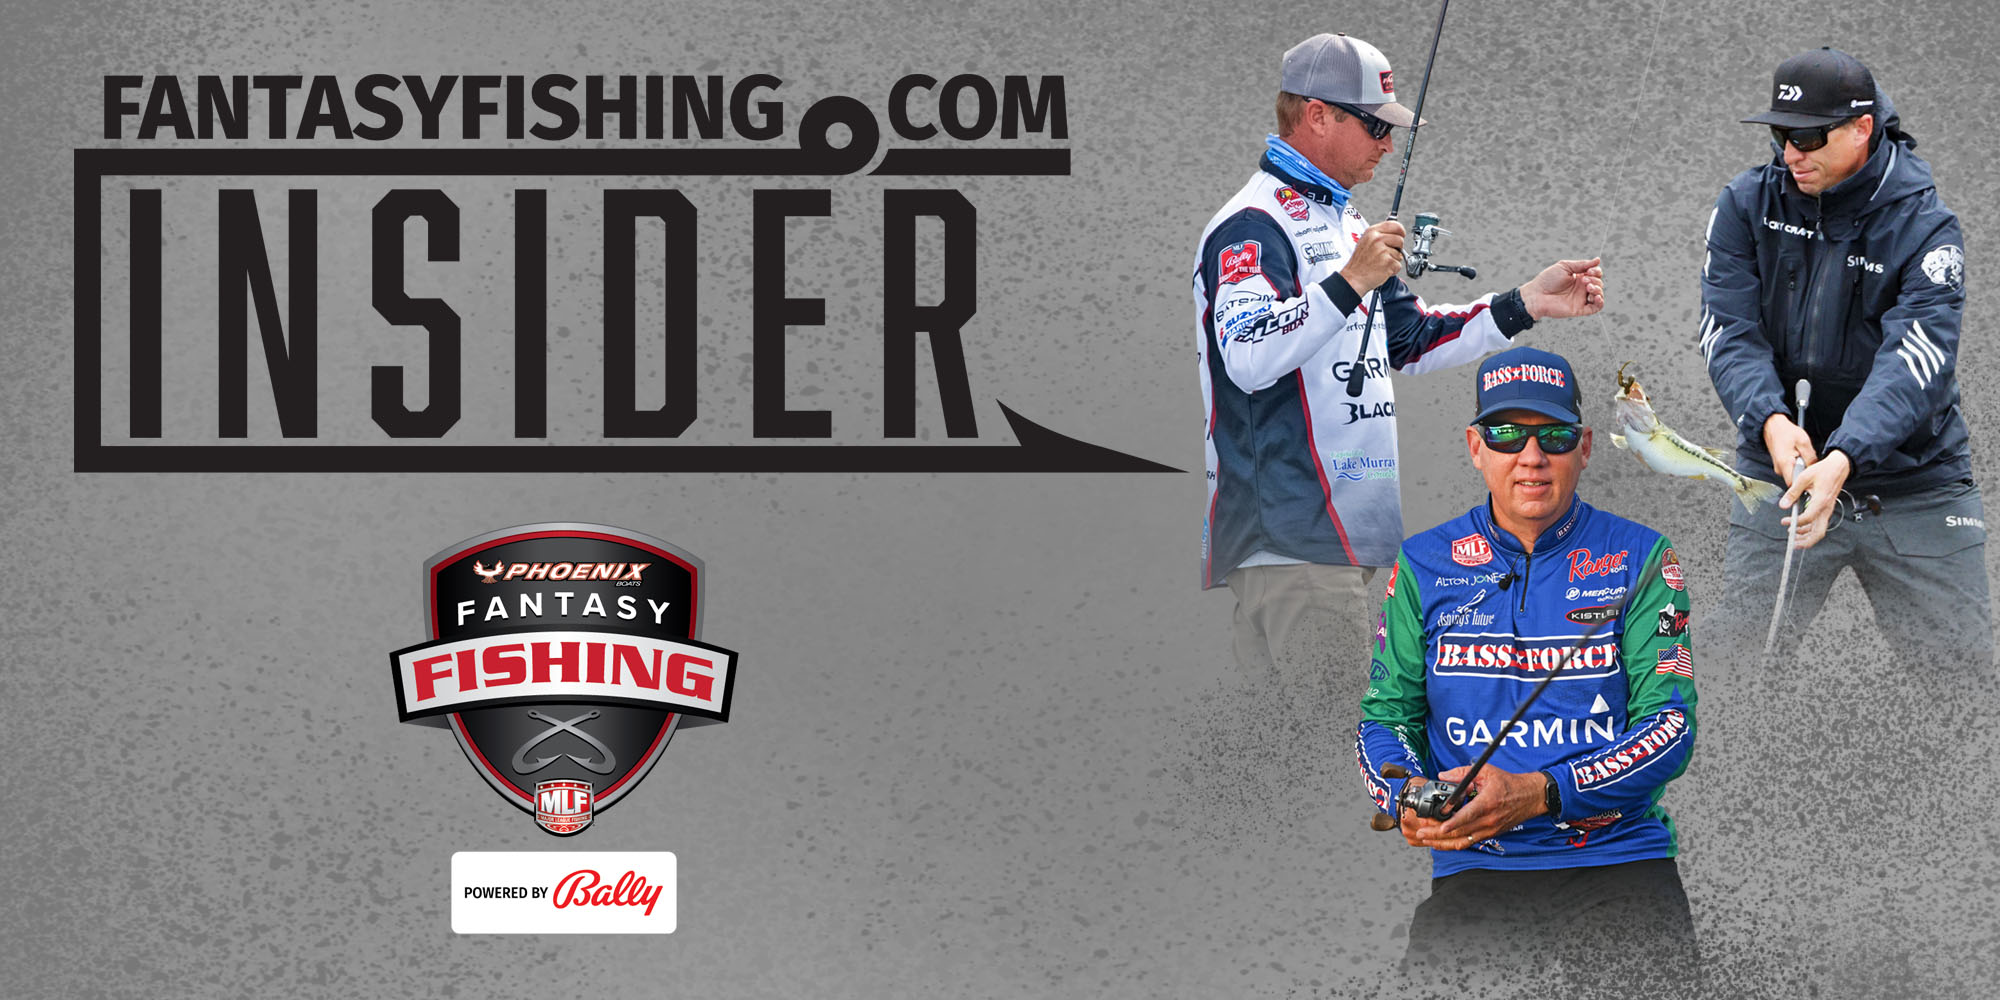 FANTASYFISHING.COM INSIDER: How to build your perfect team for